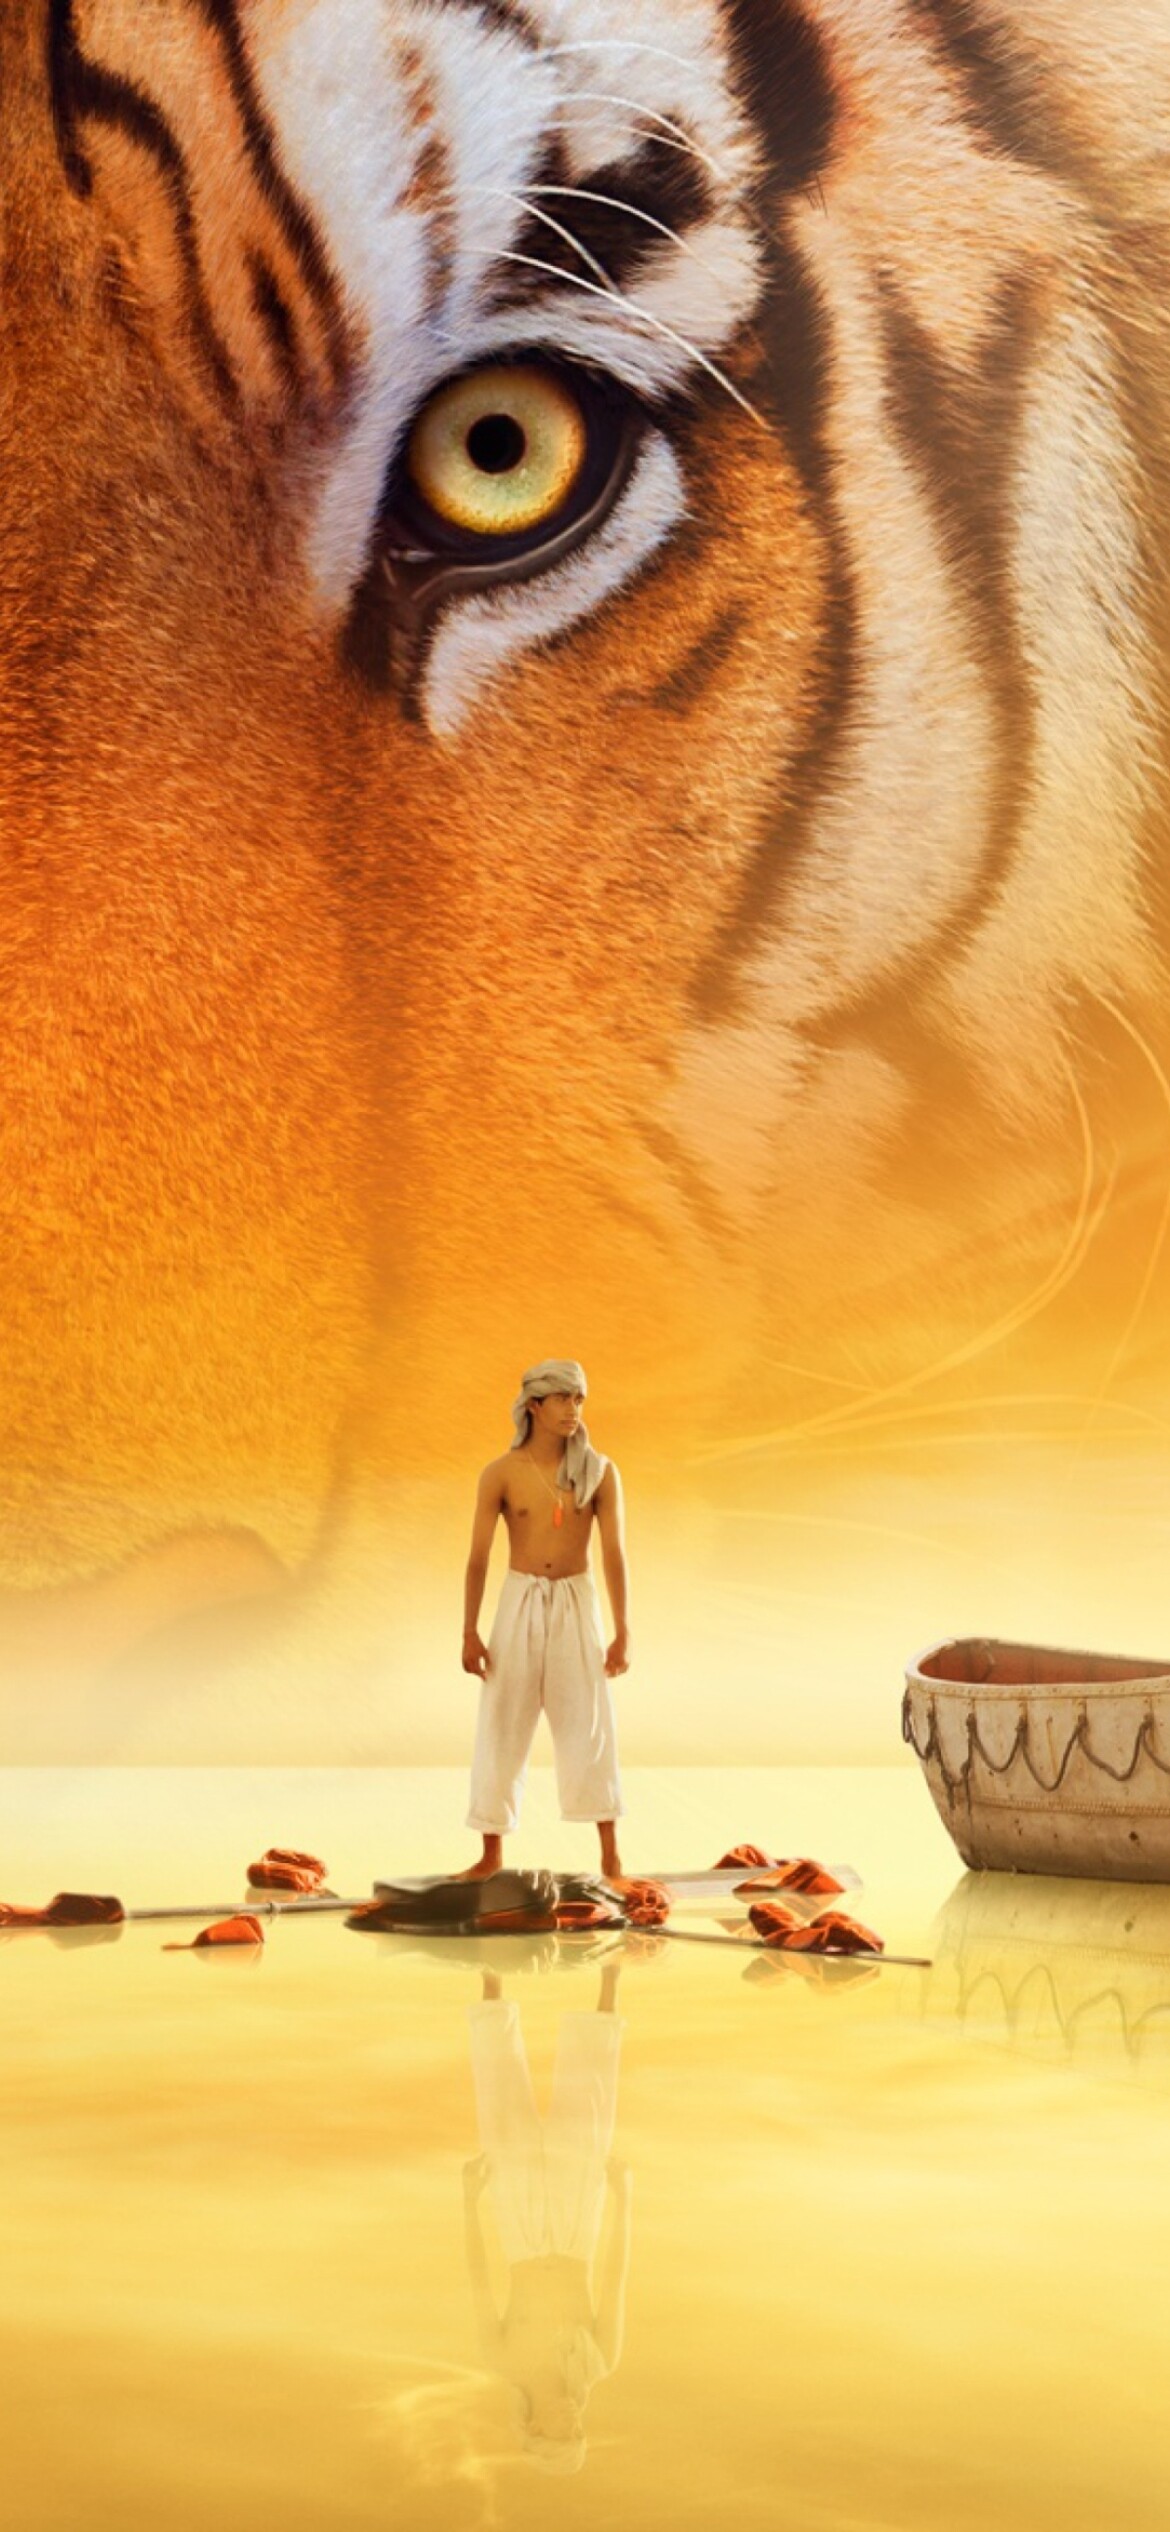 Life of Pi: Based on the best-selling novel by Yann Martel, is a magical adventure story centering on Piscene Patel, the precocious son of a zookeeper. 1170x2540 HD Wallpaper.